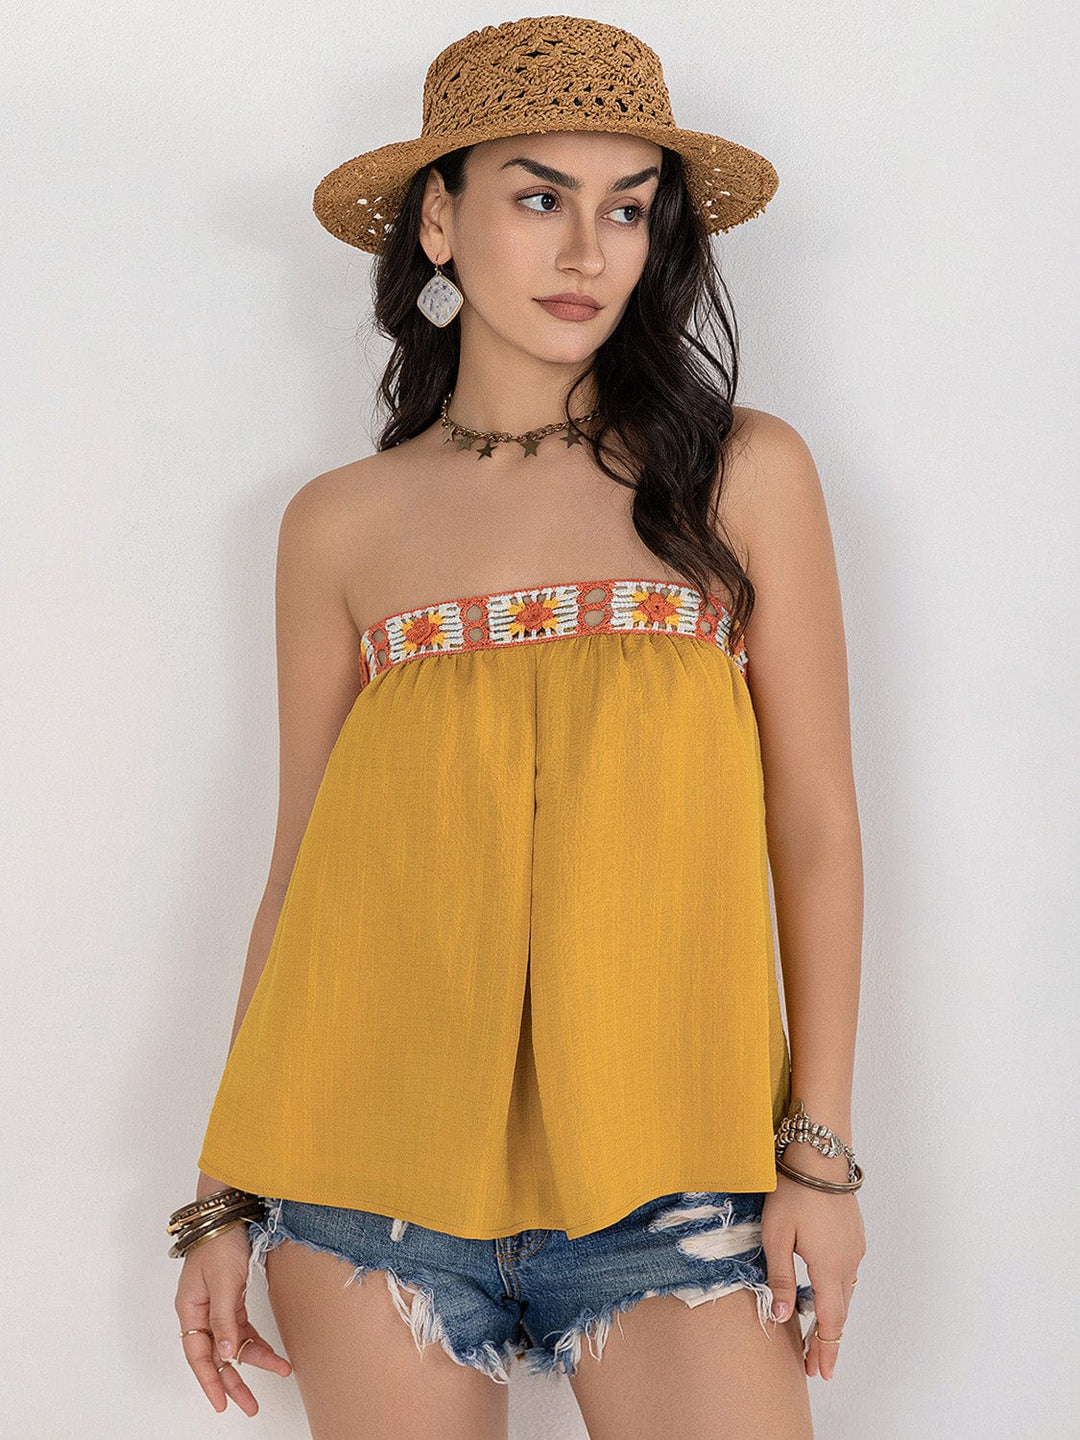 The802Gypsy shirts and tops GYPSY-Embroidered Tube Sleeveless Top